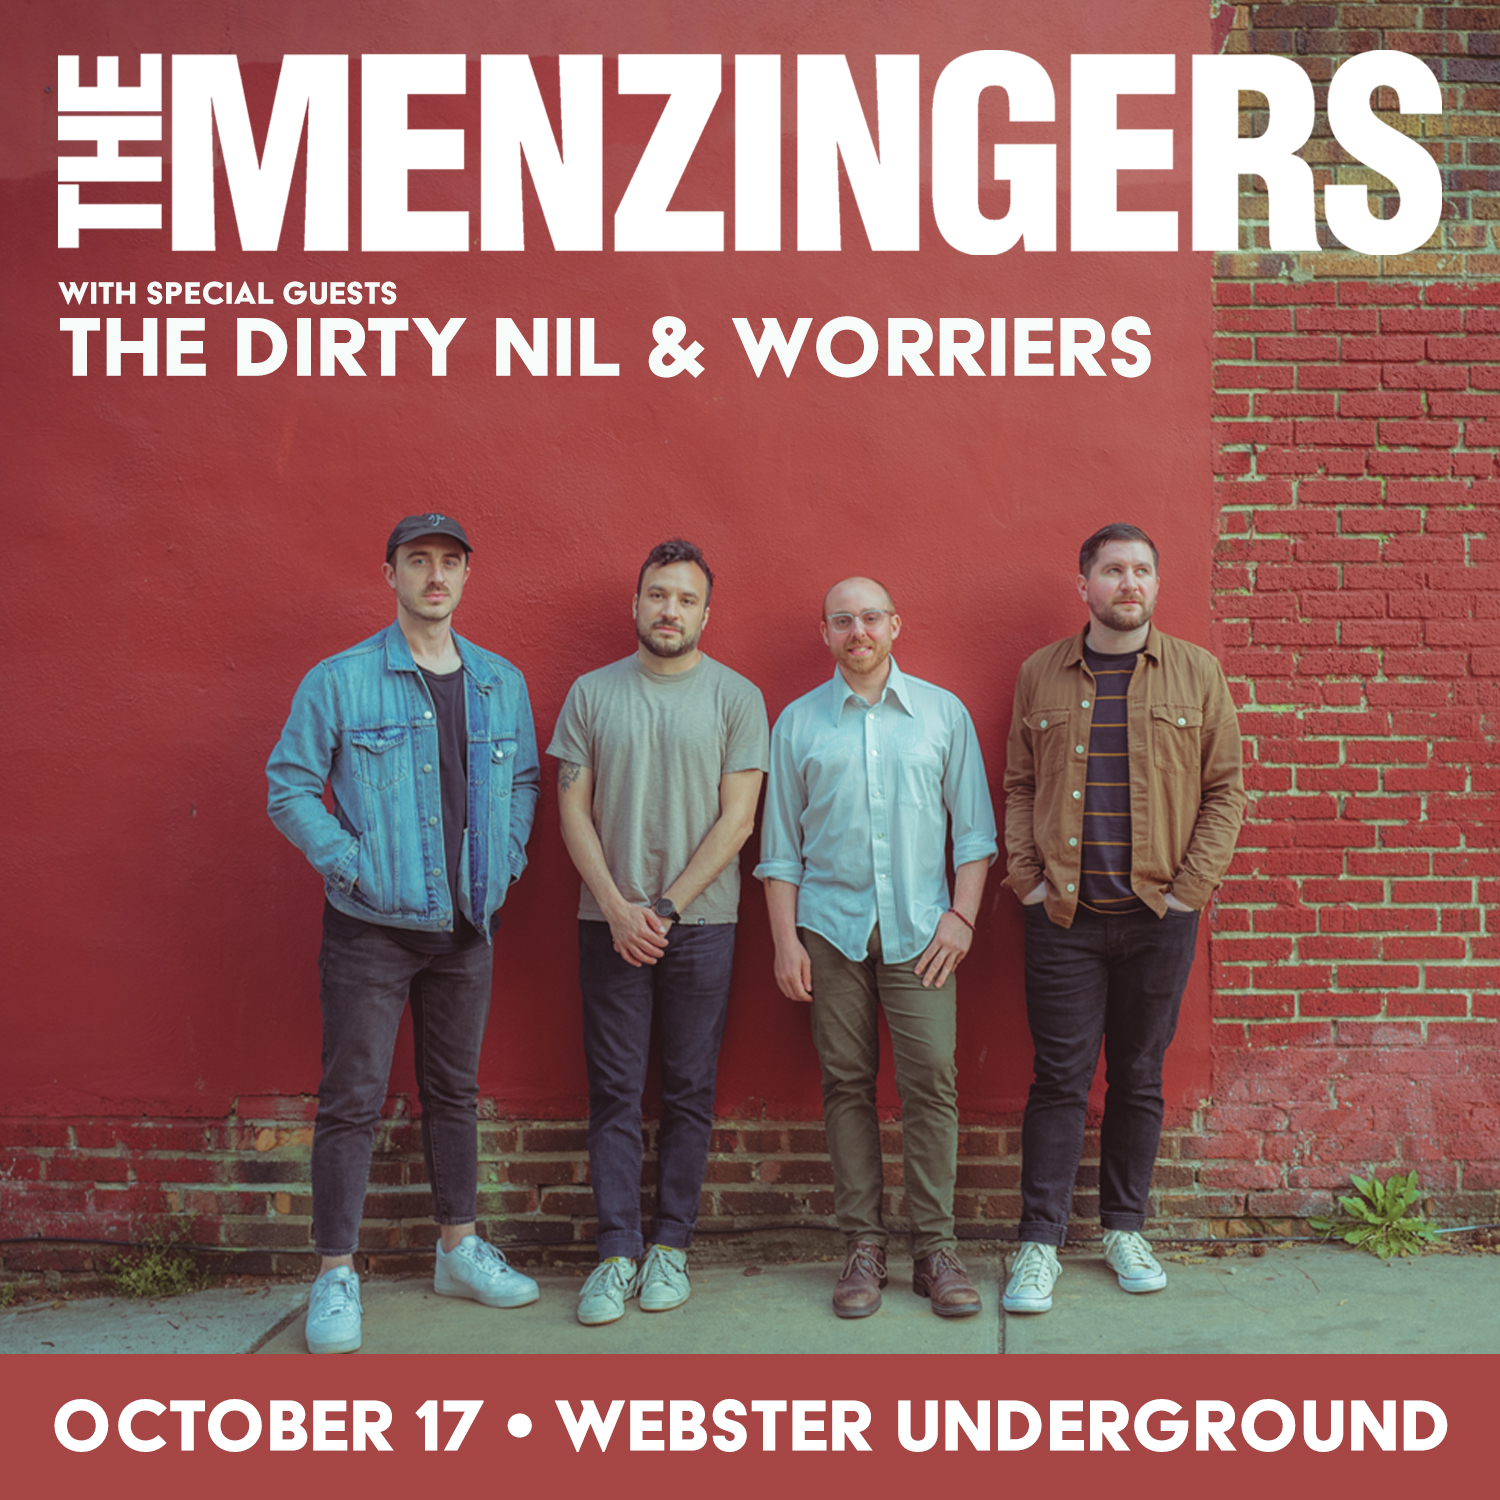 Buy Tickets to THE MENZINGERS in Hartford on Oct 17, 2021